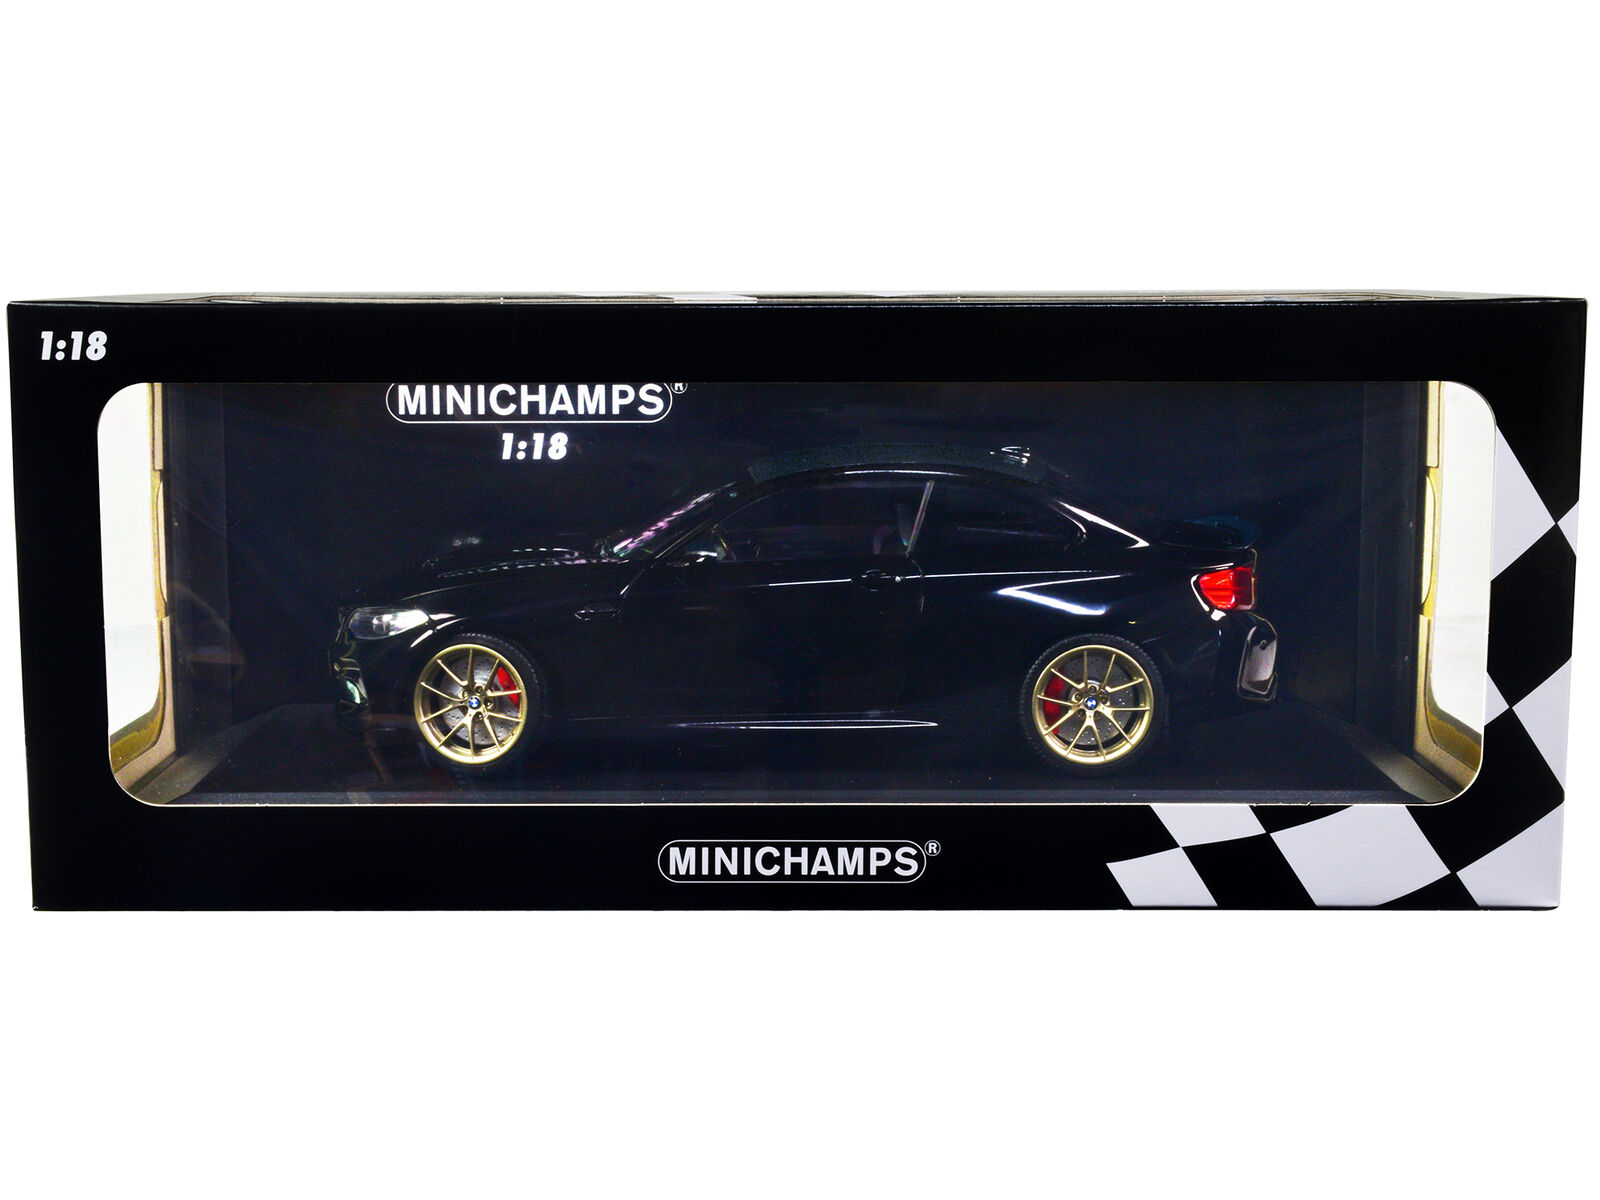 2020 BMW M2 CS Black Metallic with Carbon Top and Gold Wheels 1/18 Diecast Model